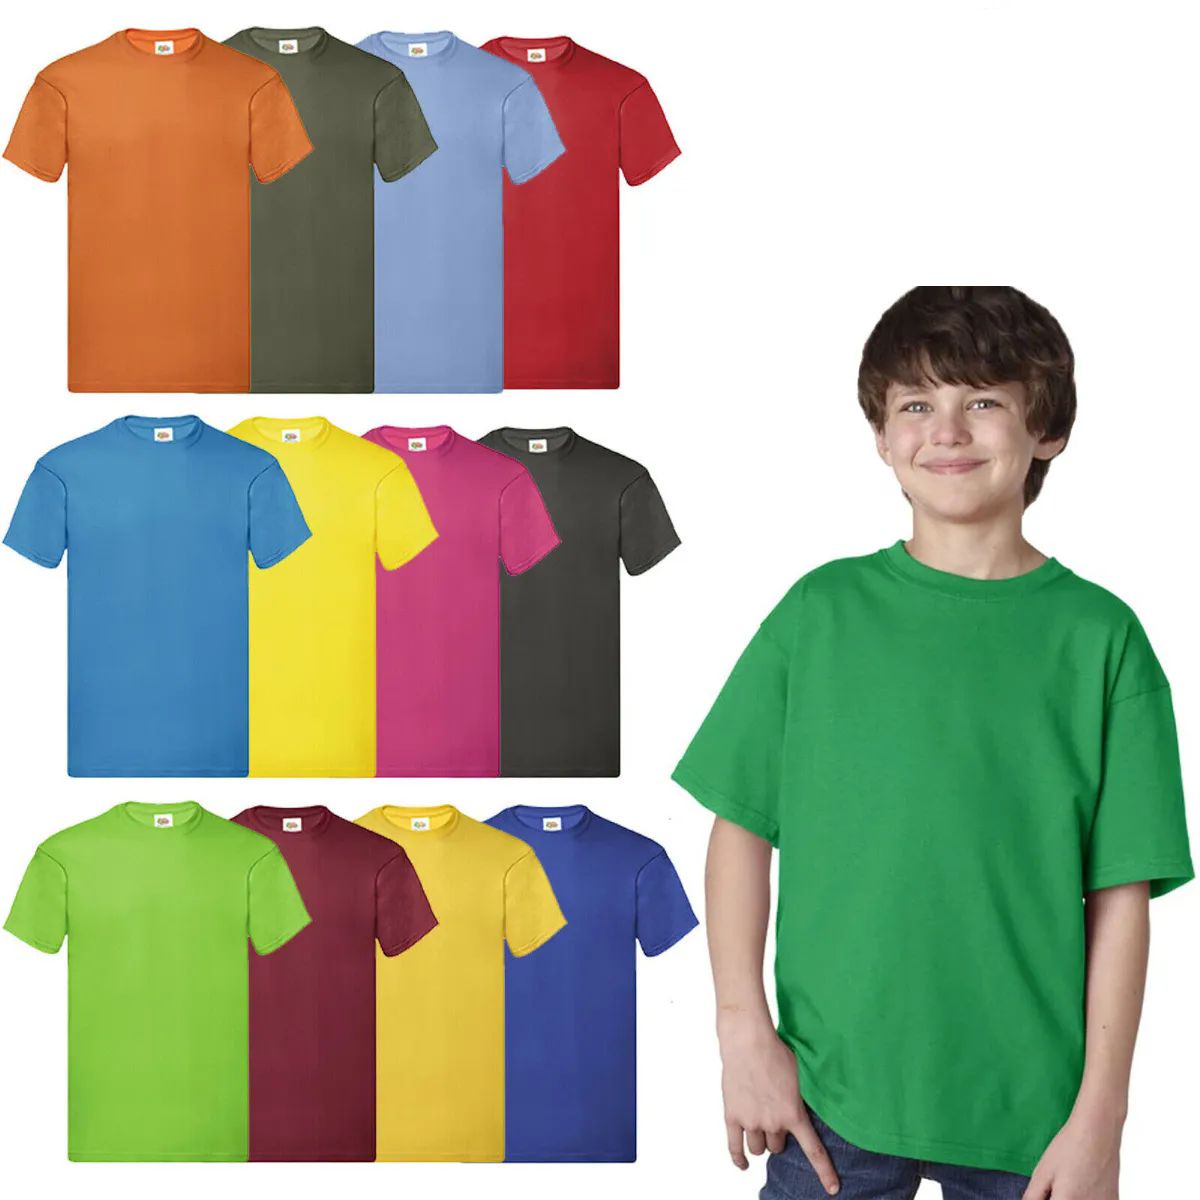 576 Pieces of Billion Hats Kids Youth Cotton Assorted Colors T Shirts Size M